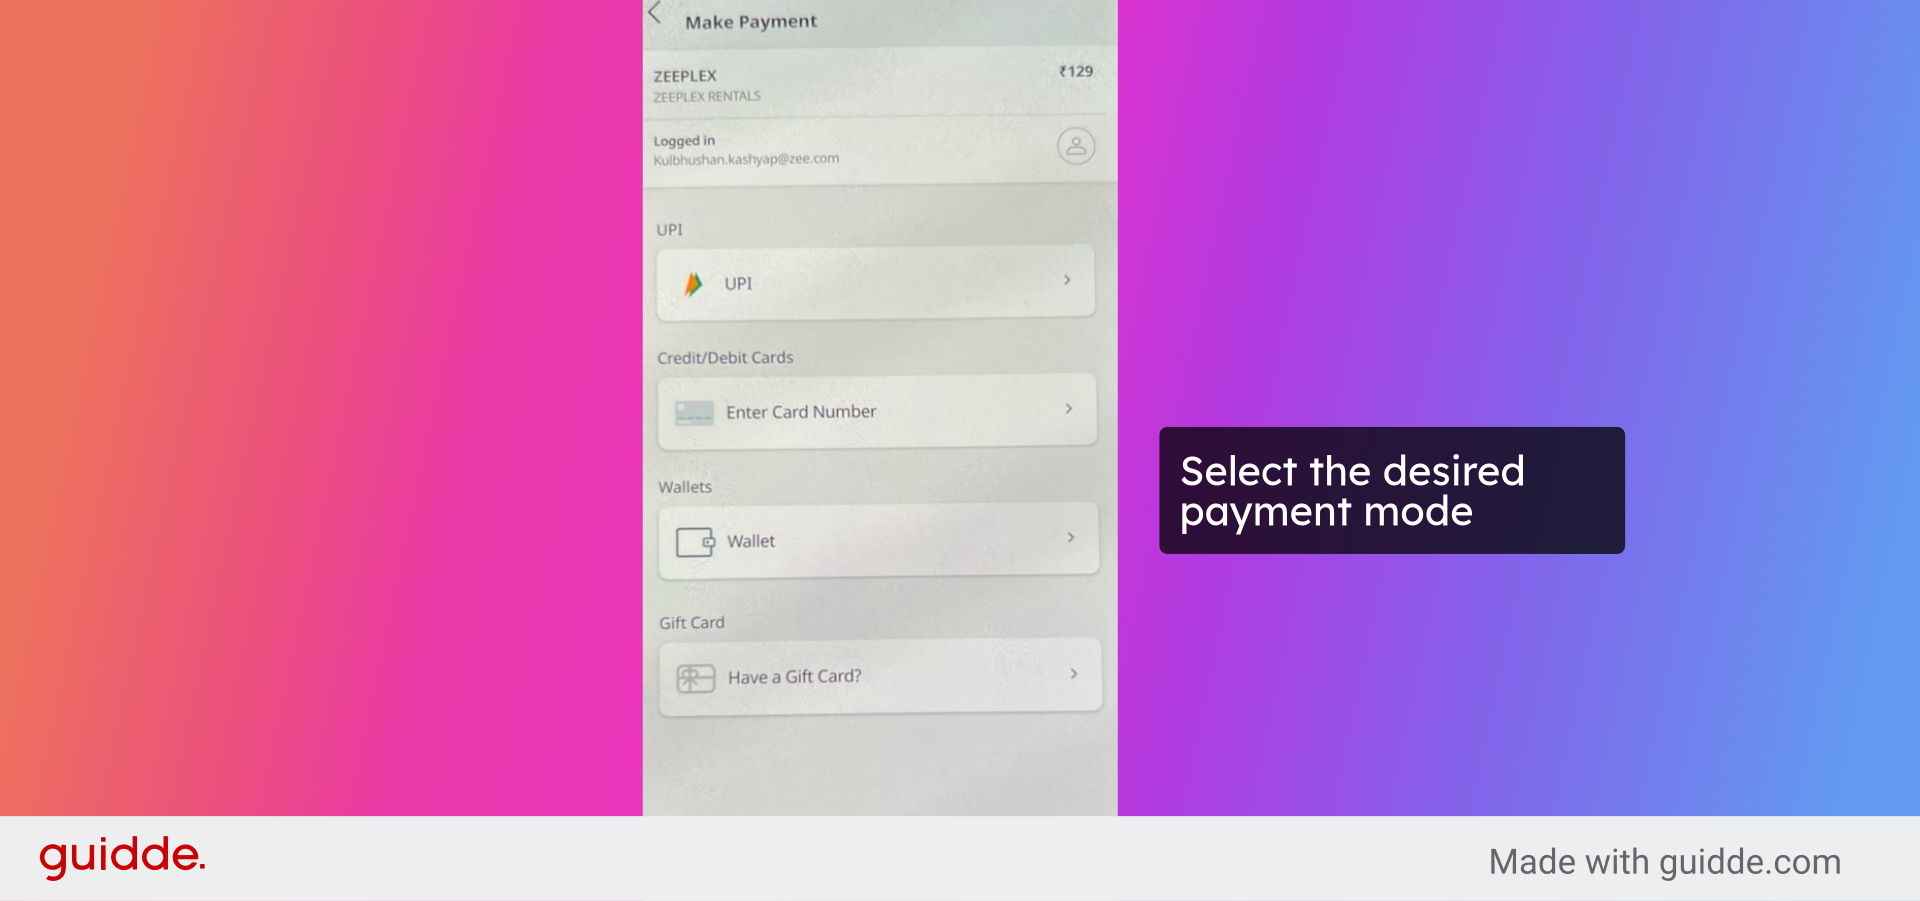 Select the desired payment mode